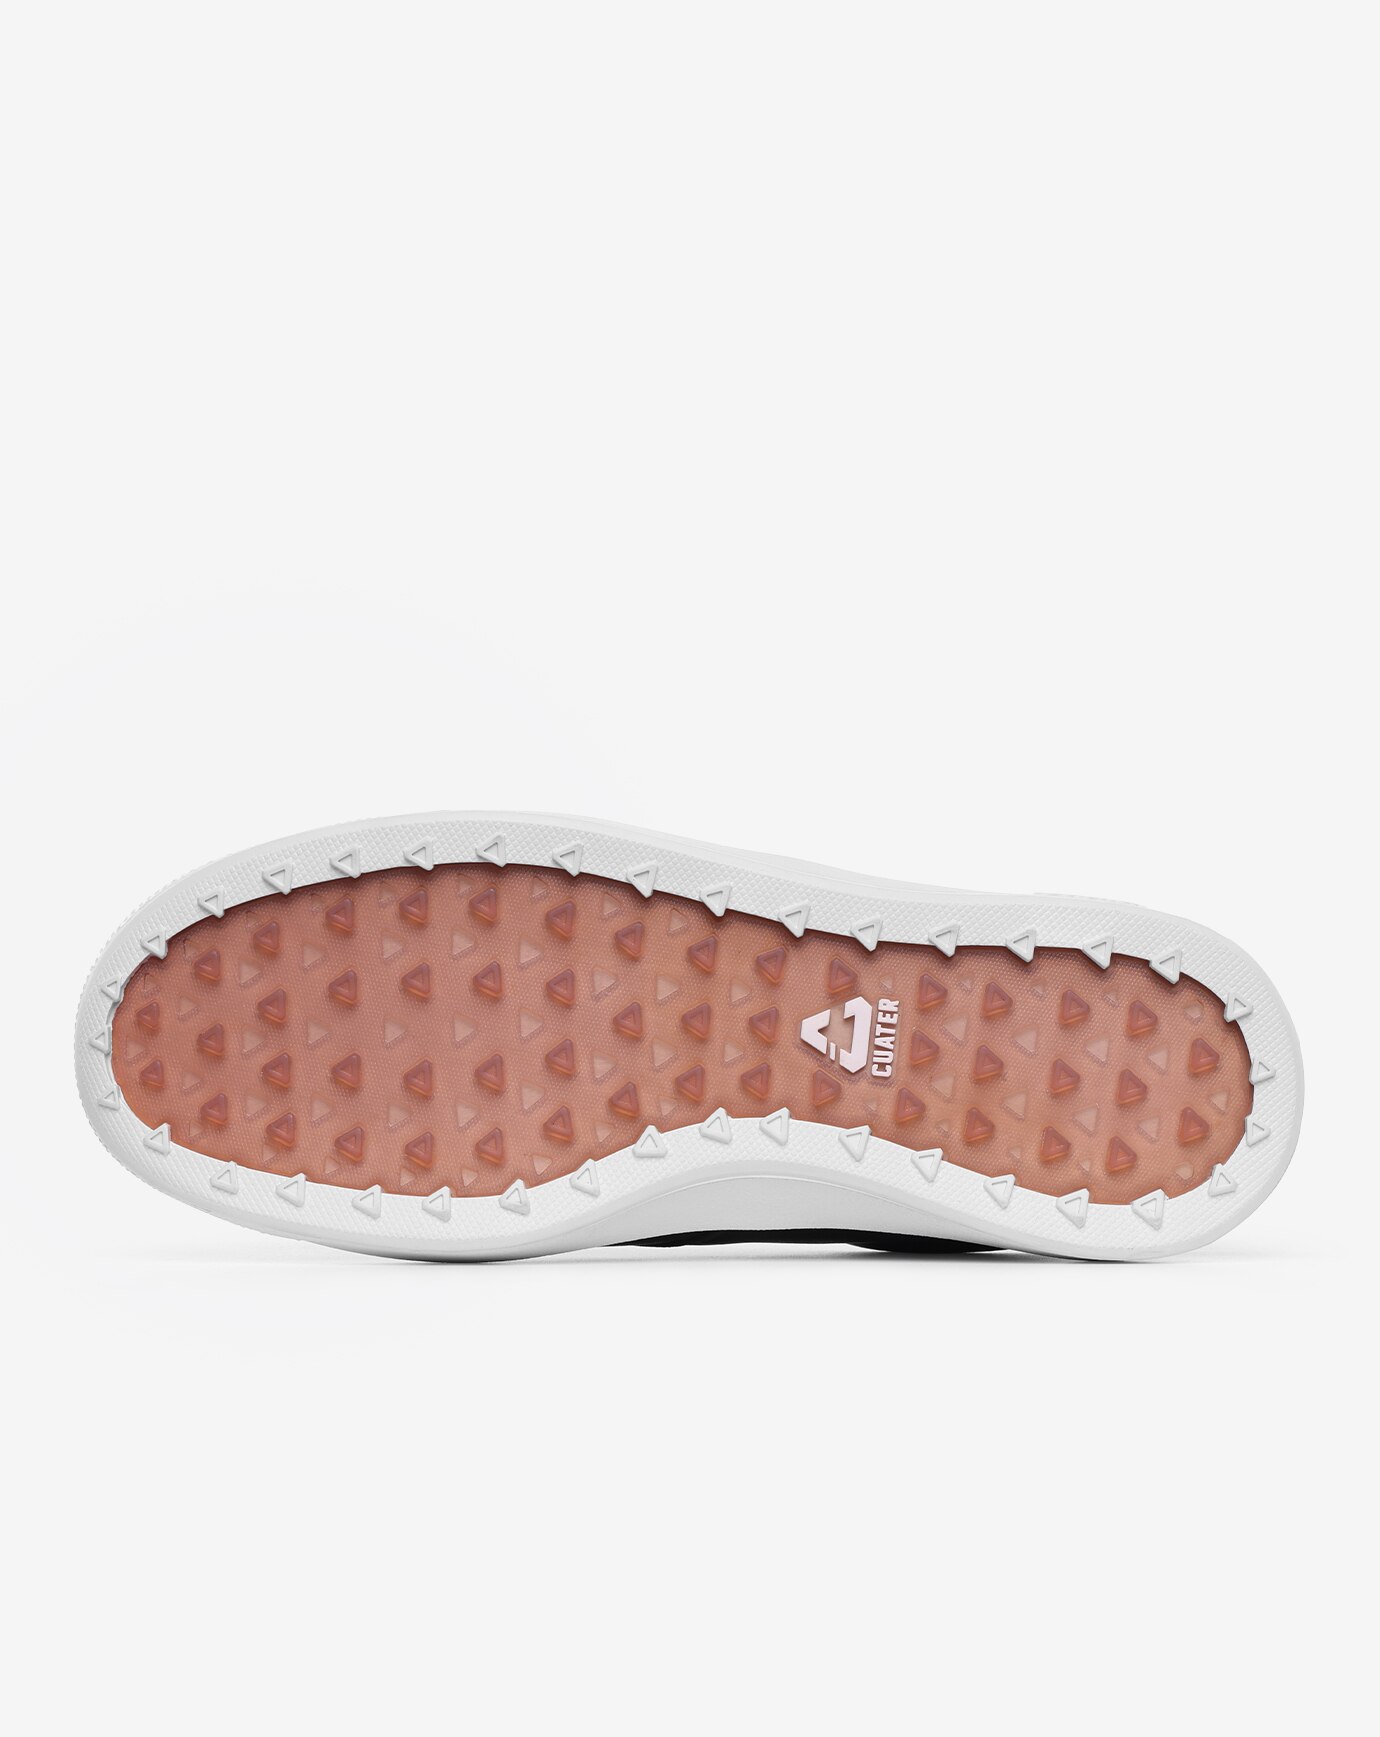 THE WILDCARD LEATHER SPIKELESS GOLF SHOE Image Thumbnail 2